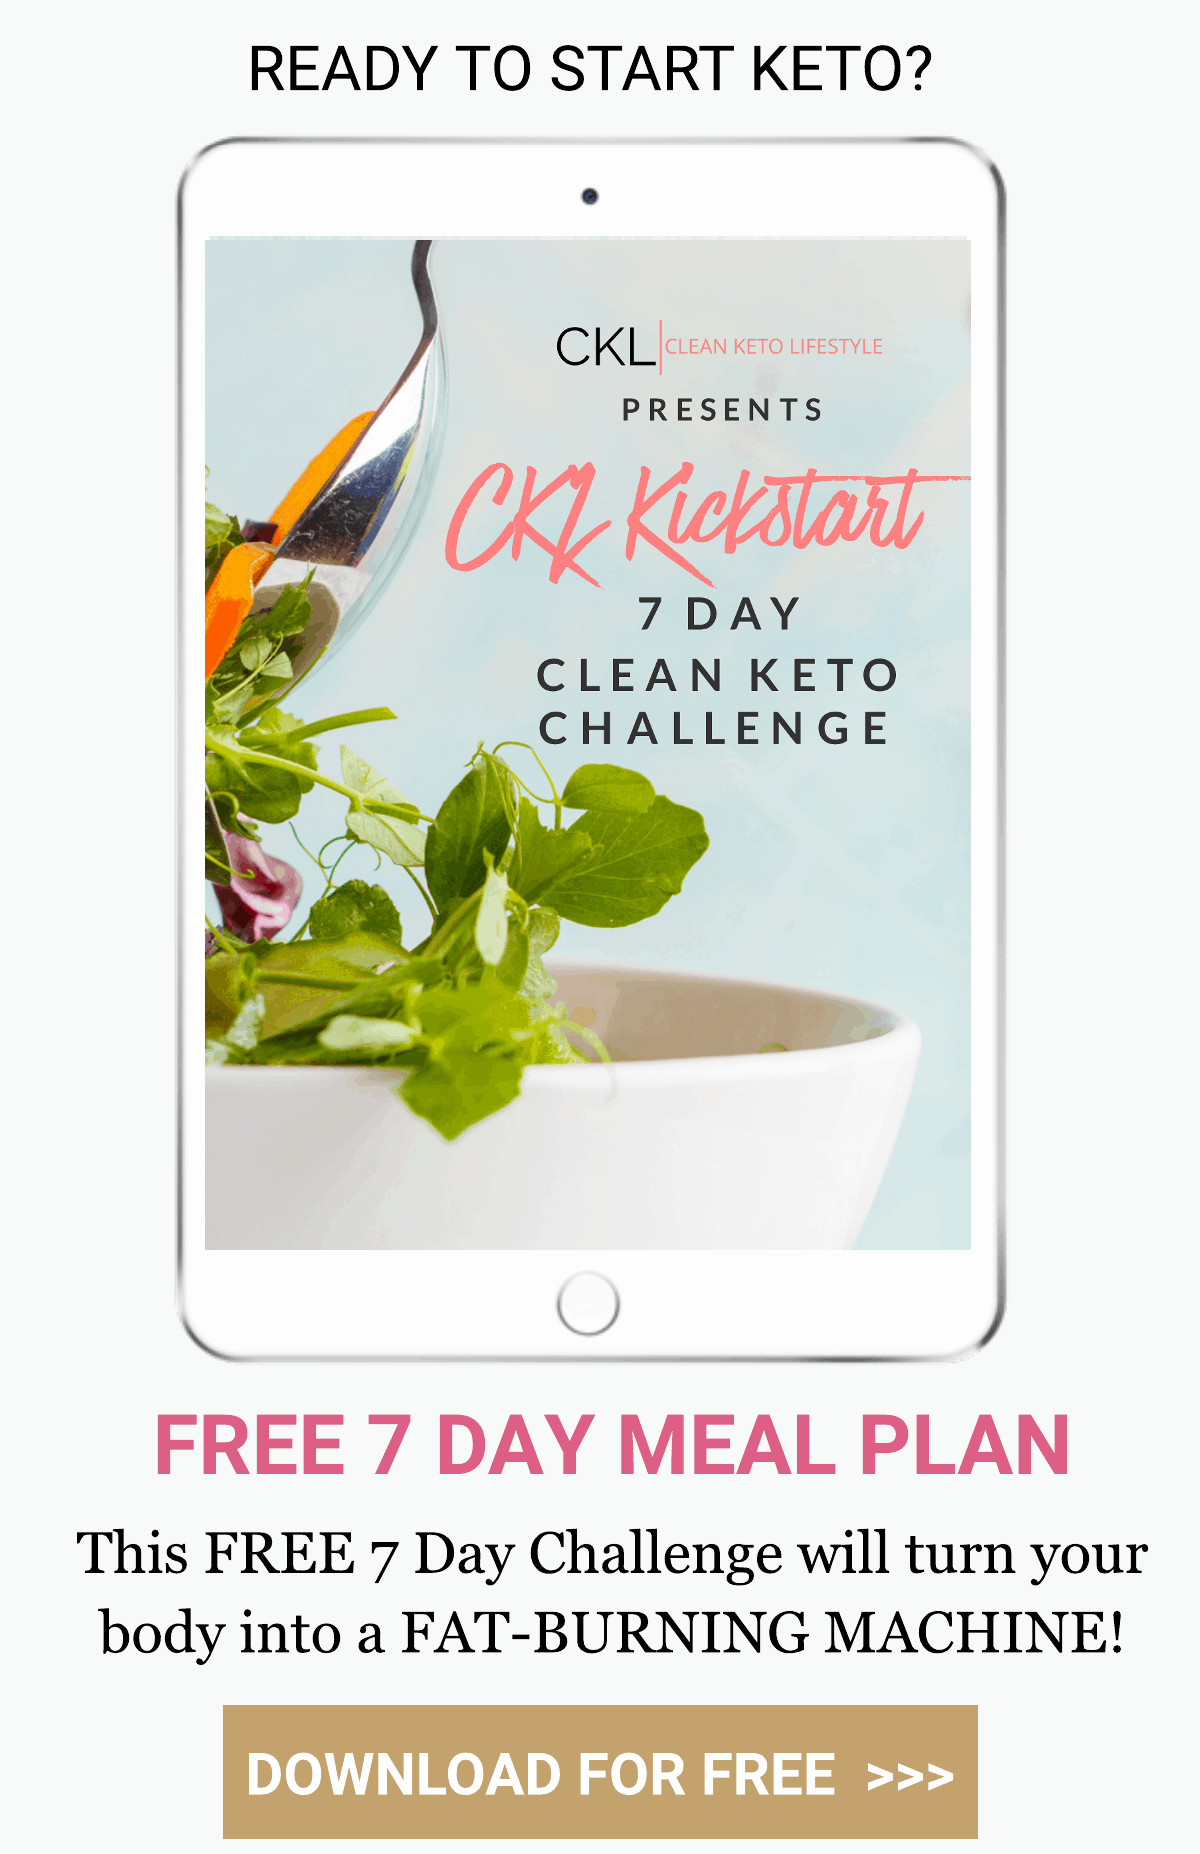 Clean Keto Meal Plan Recipes
 Clean Keto Lifestyle Keto Recipes Resources and Meal Plans